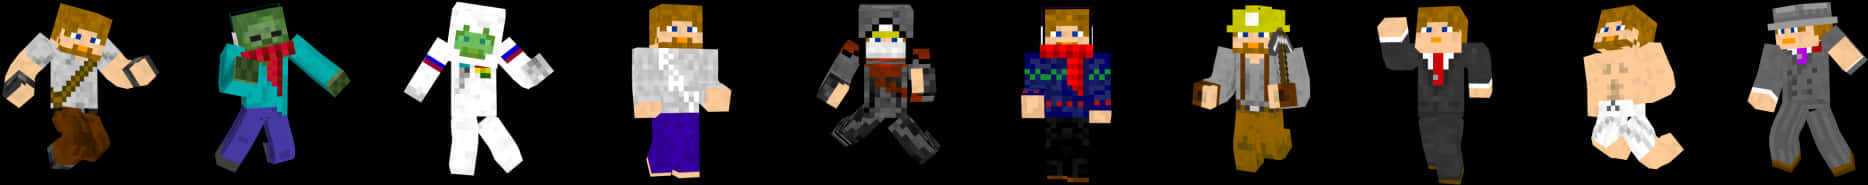 A Pixelated Video Game Characters